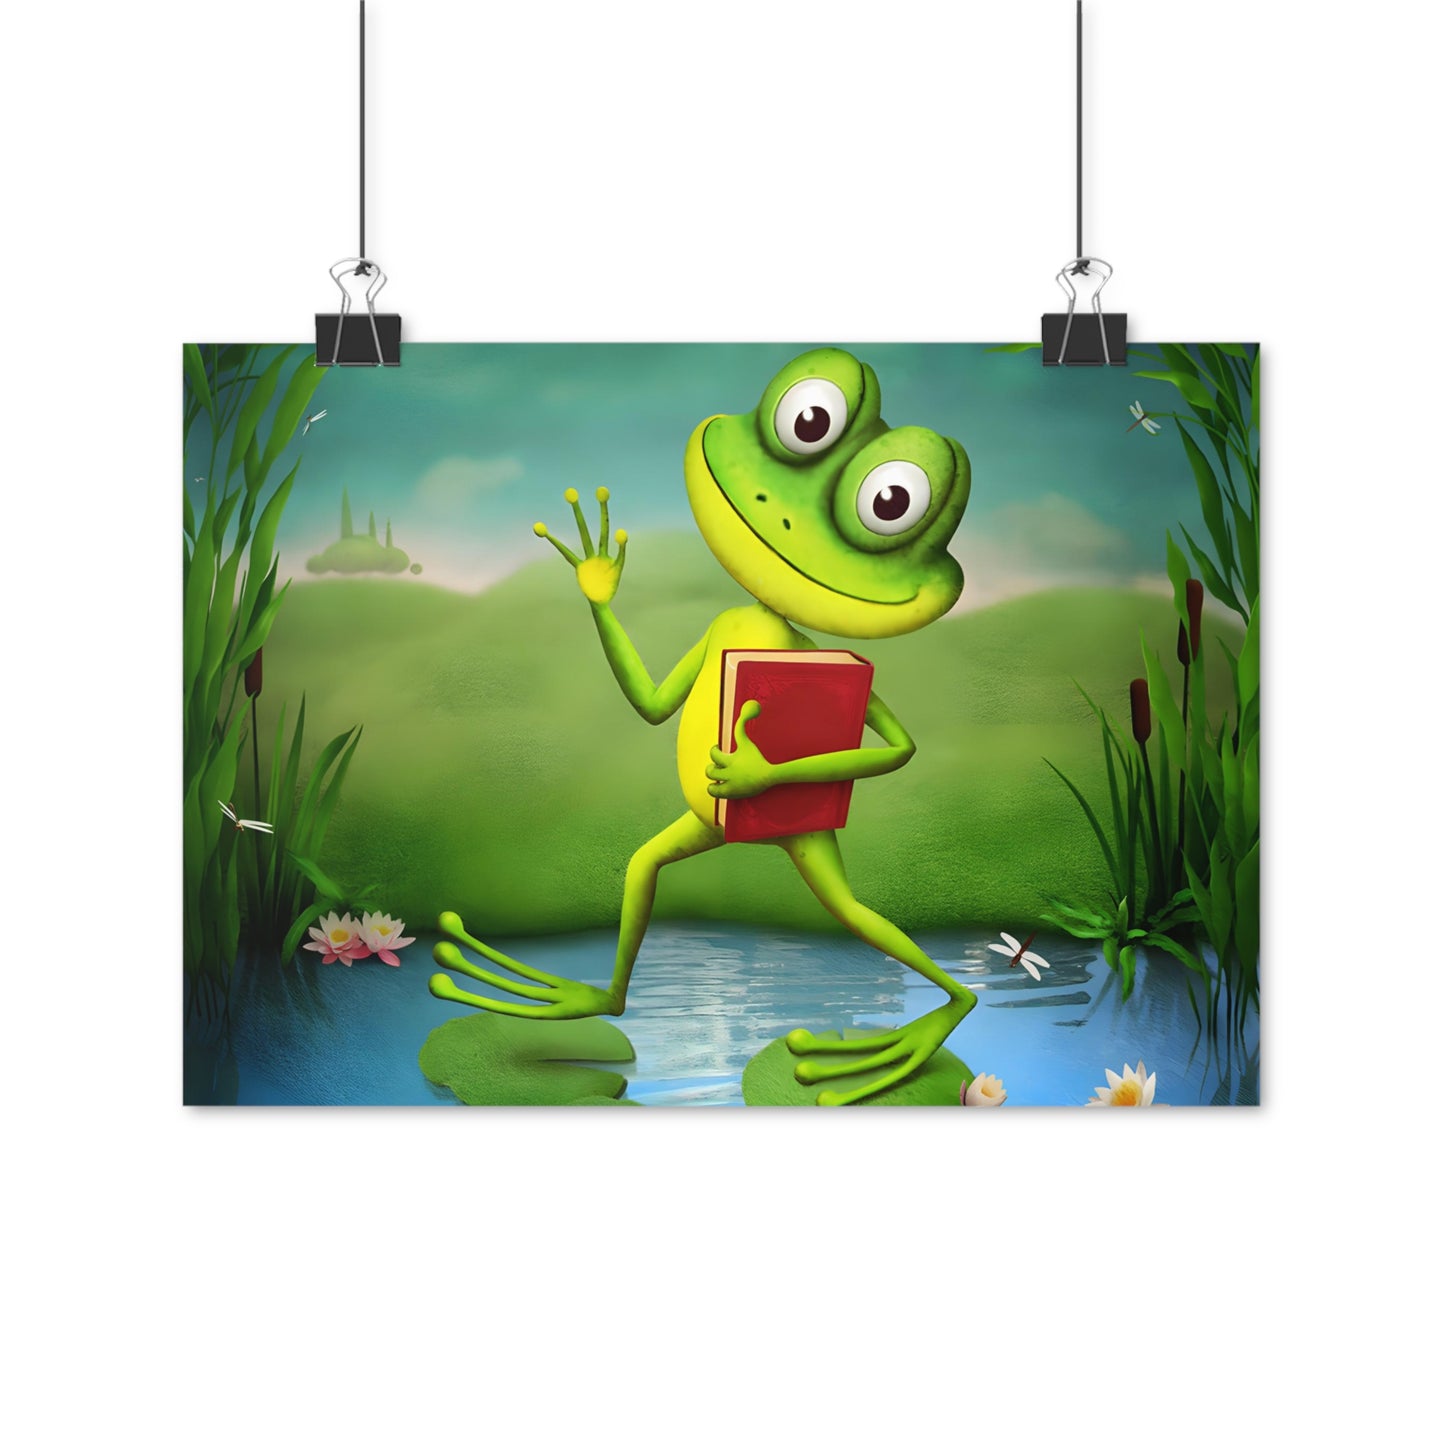 Posters - The Frog book